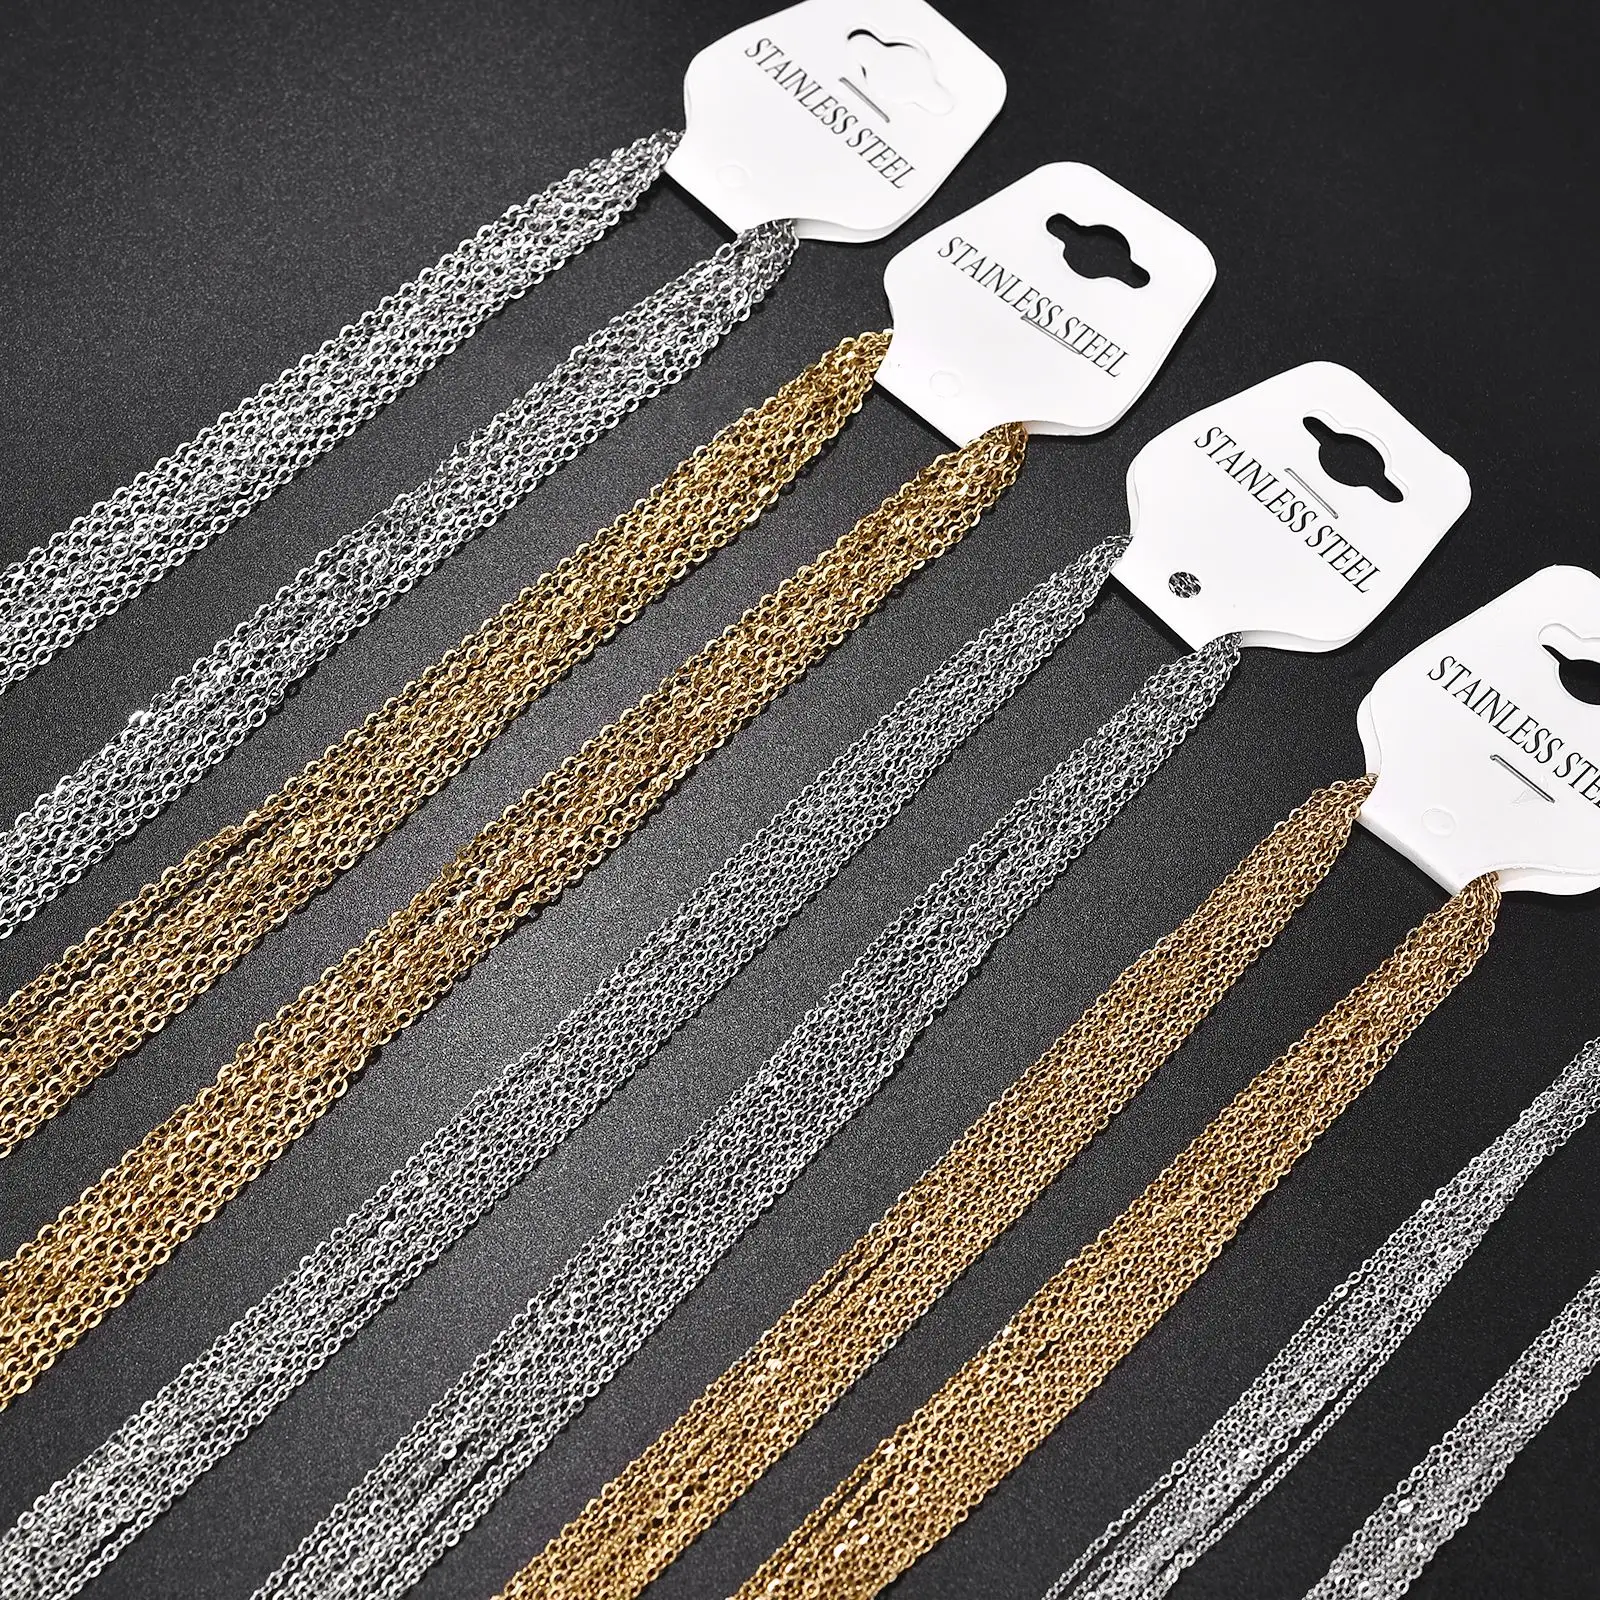 10pcs Gold Color Stainless Steel Link 45/50/55/60CM Bulk Necklace Chains  Jewelry Cuban Chains Wholesale Chain Chokers DIY Crafts - AliExpress